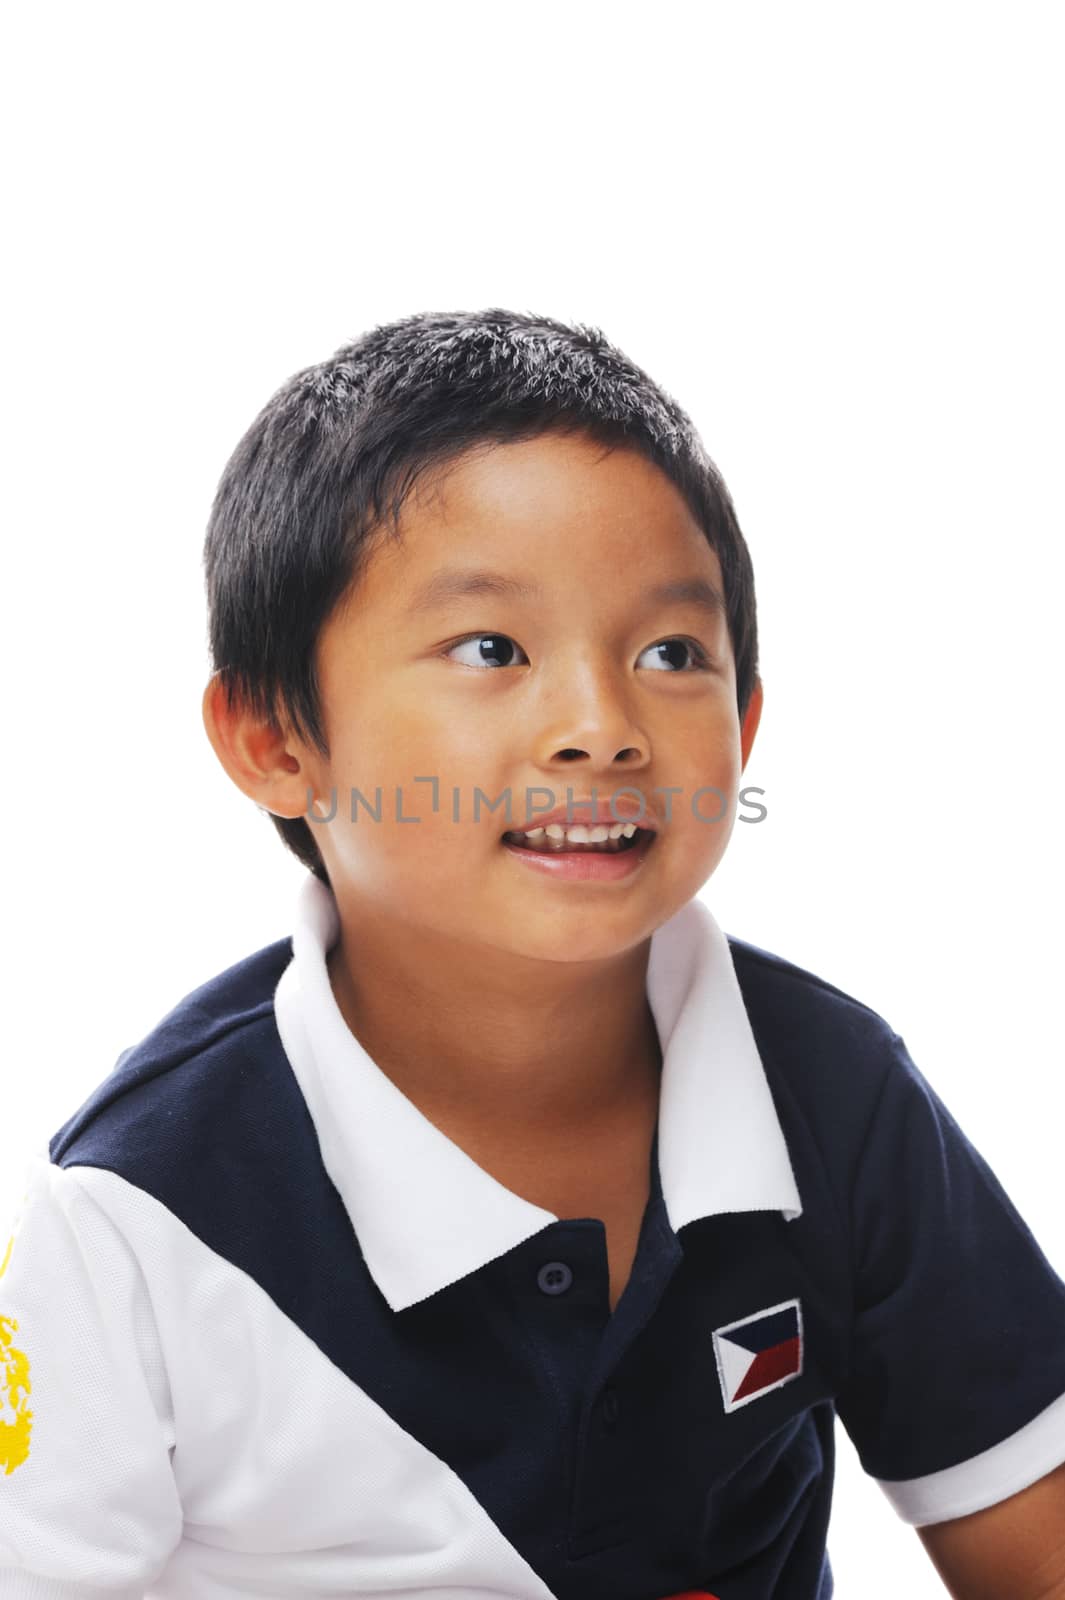 Asian boy wearing philippines flag on shirt